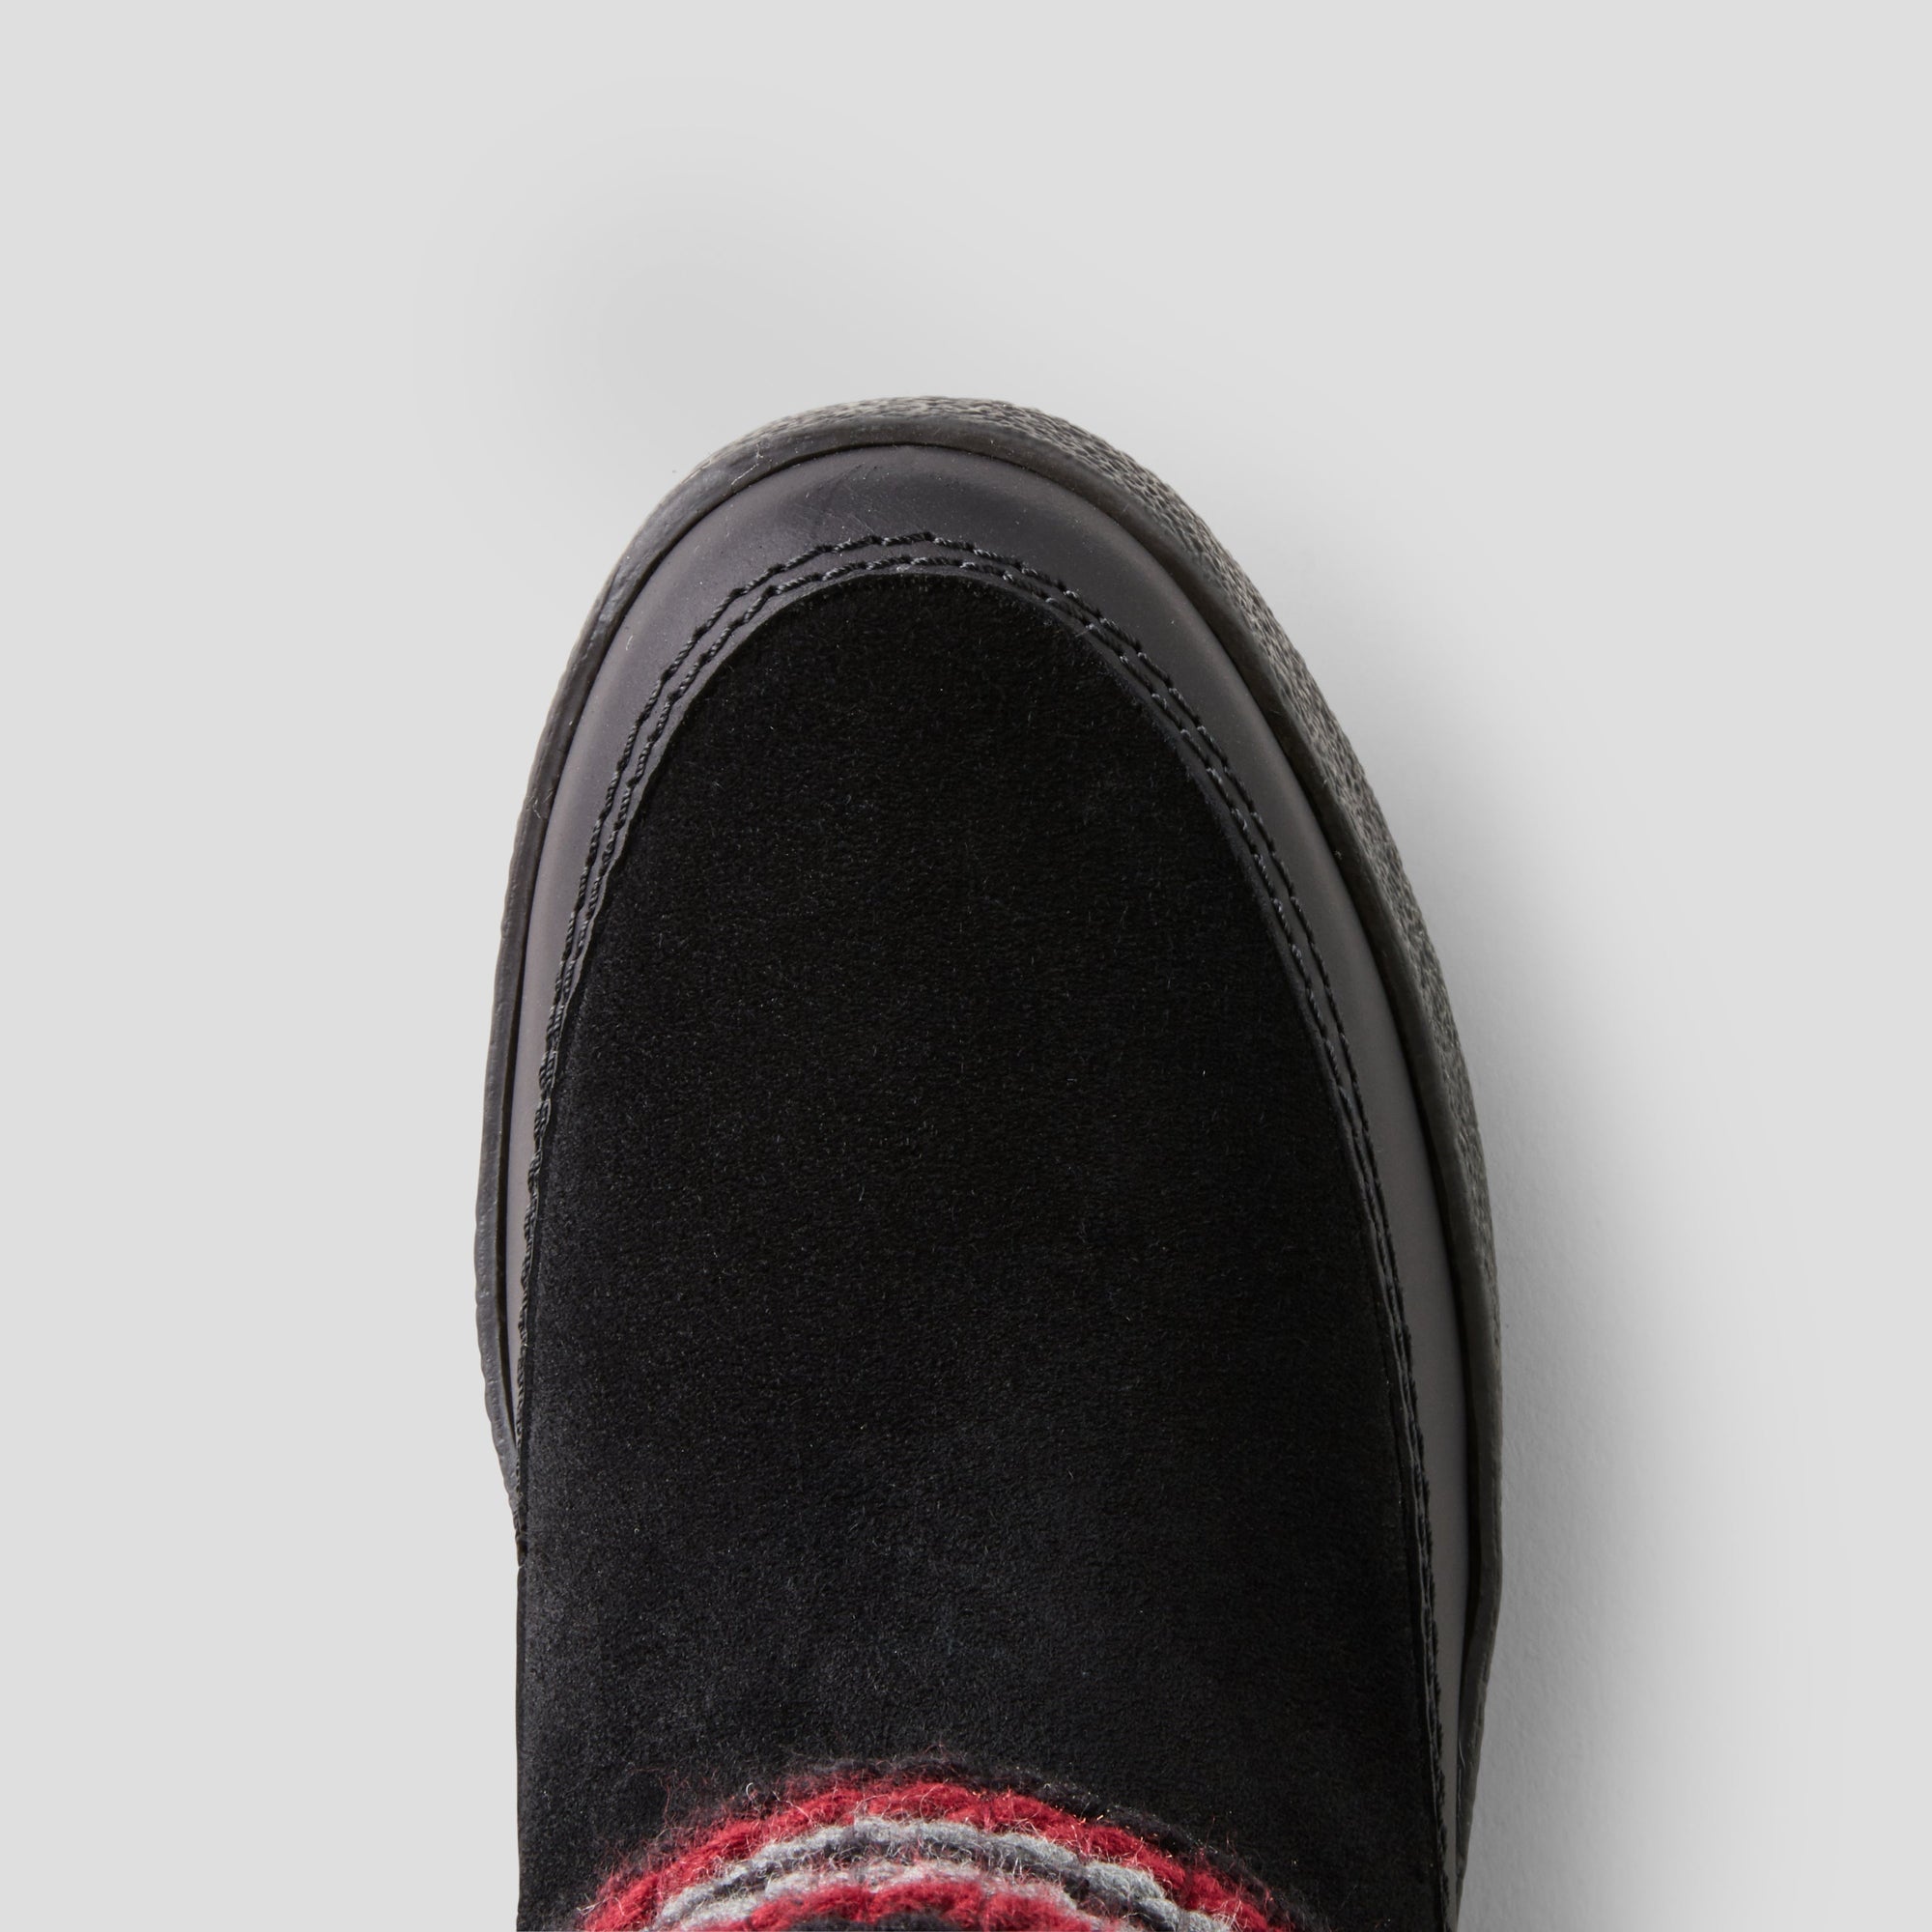 Duncan Suede Shearling Boot - Colour Black